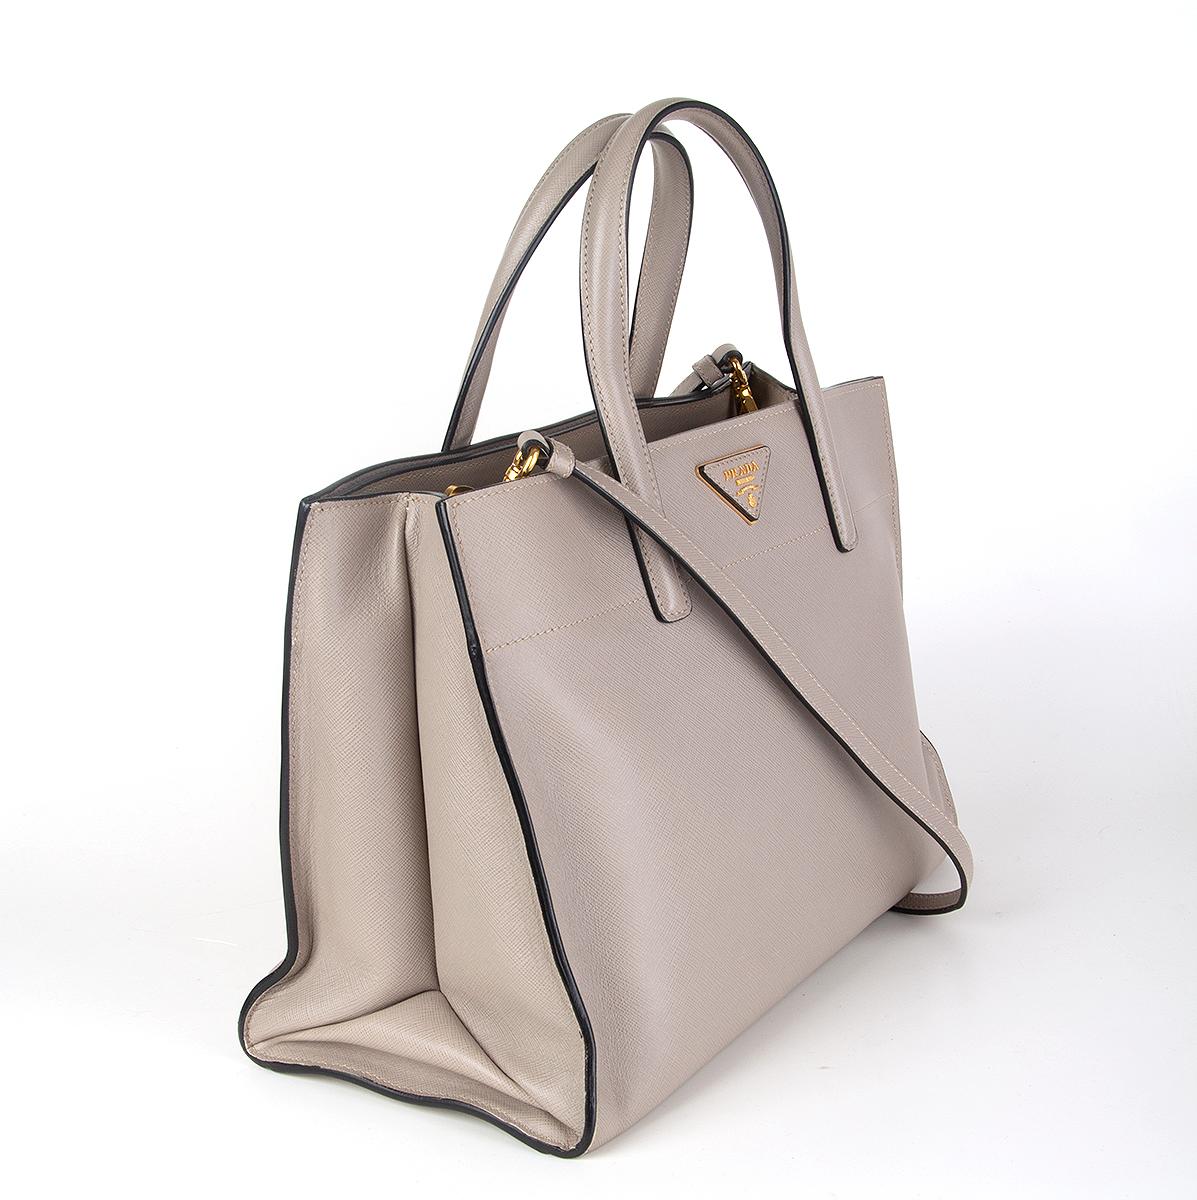 
100% authentic Prada top-handle shoulder bag in taupe Saffiano leather featuring gold-tone hardware. Interior is divided in three compartments with a zipper pocket against the back and the front with two open pockets on top. Zipper pocket in the